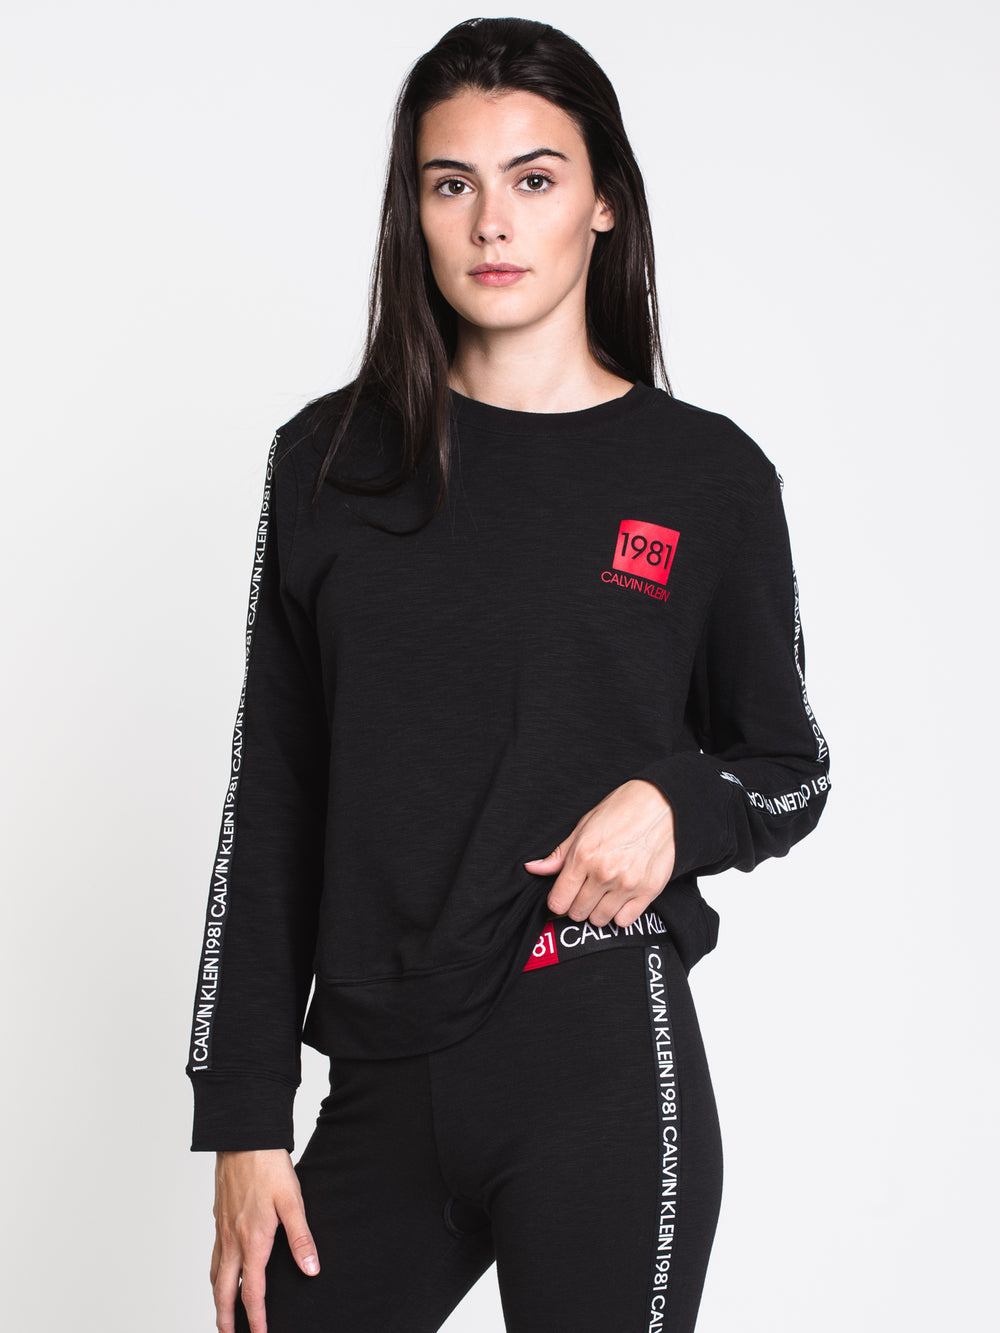 WOMENS 1981 BOLD TAPED CREW - BLACK - CLEARANCE